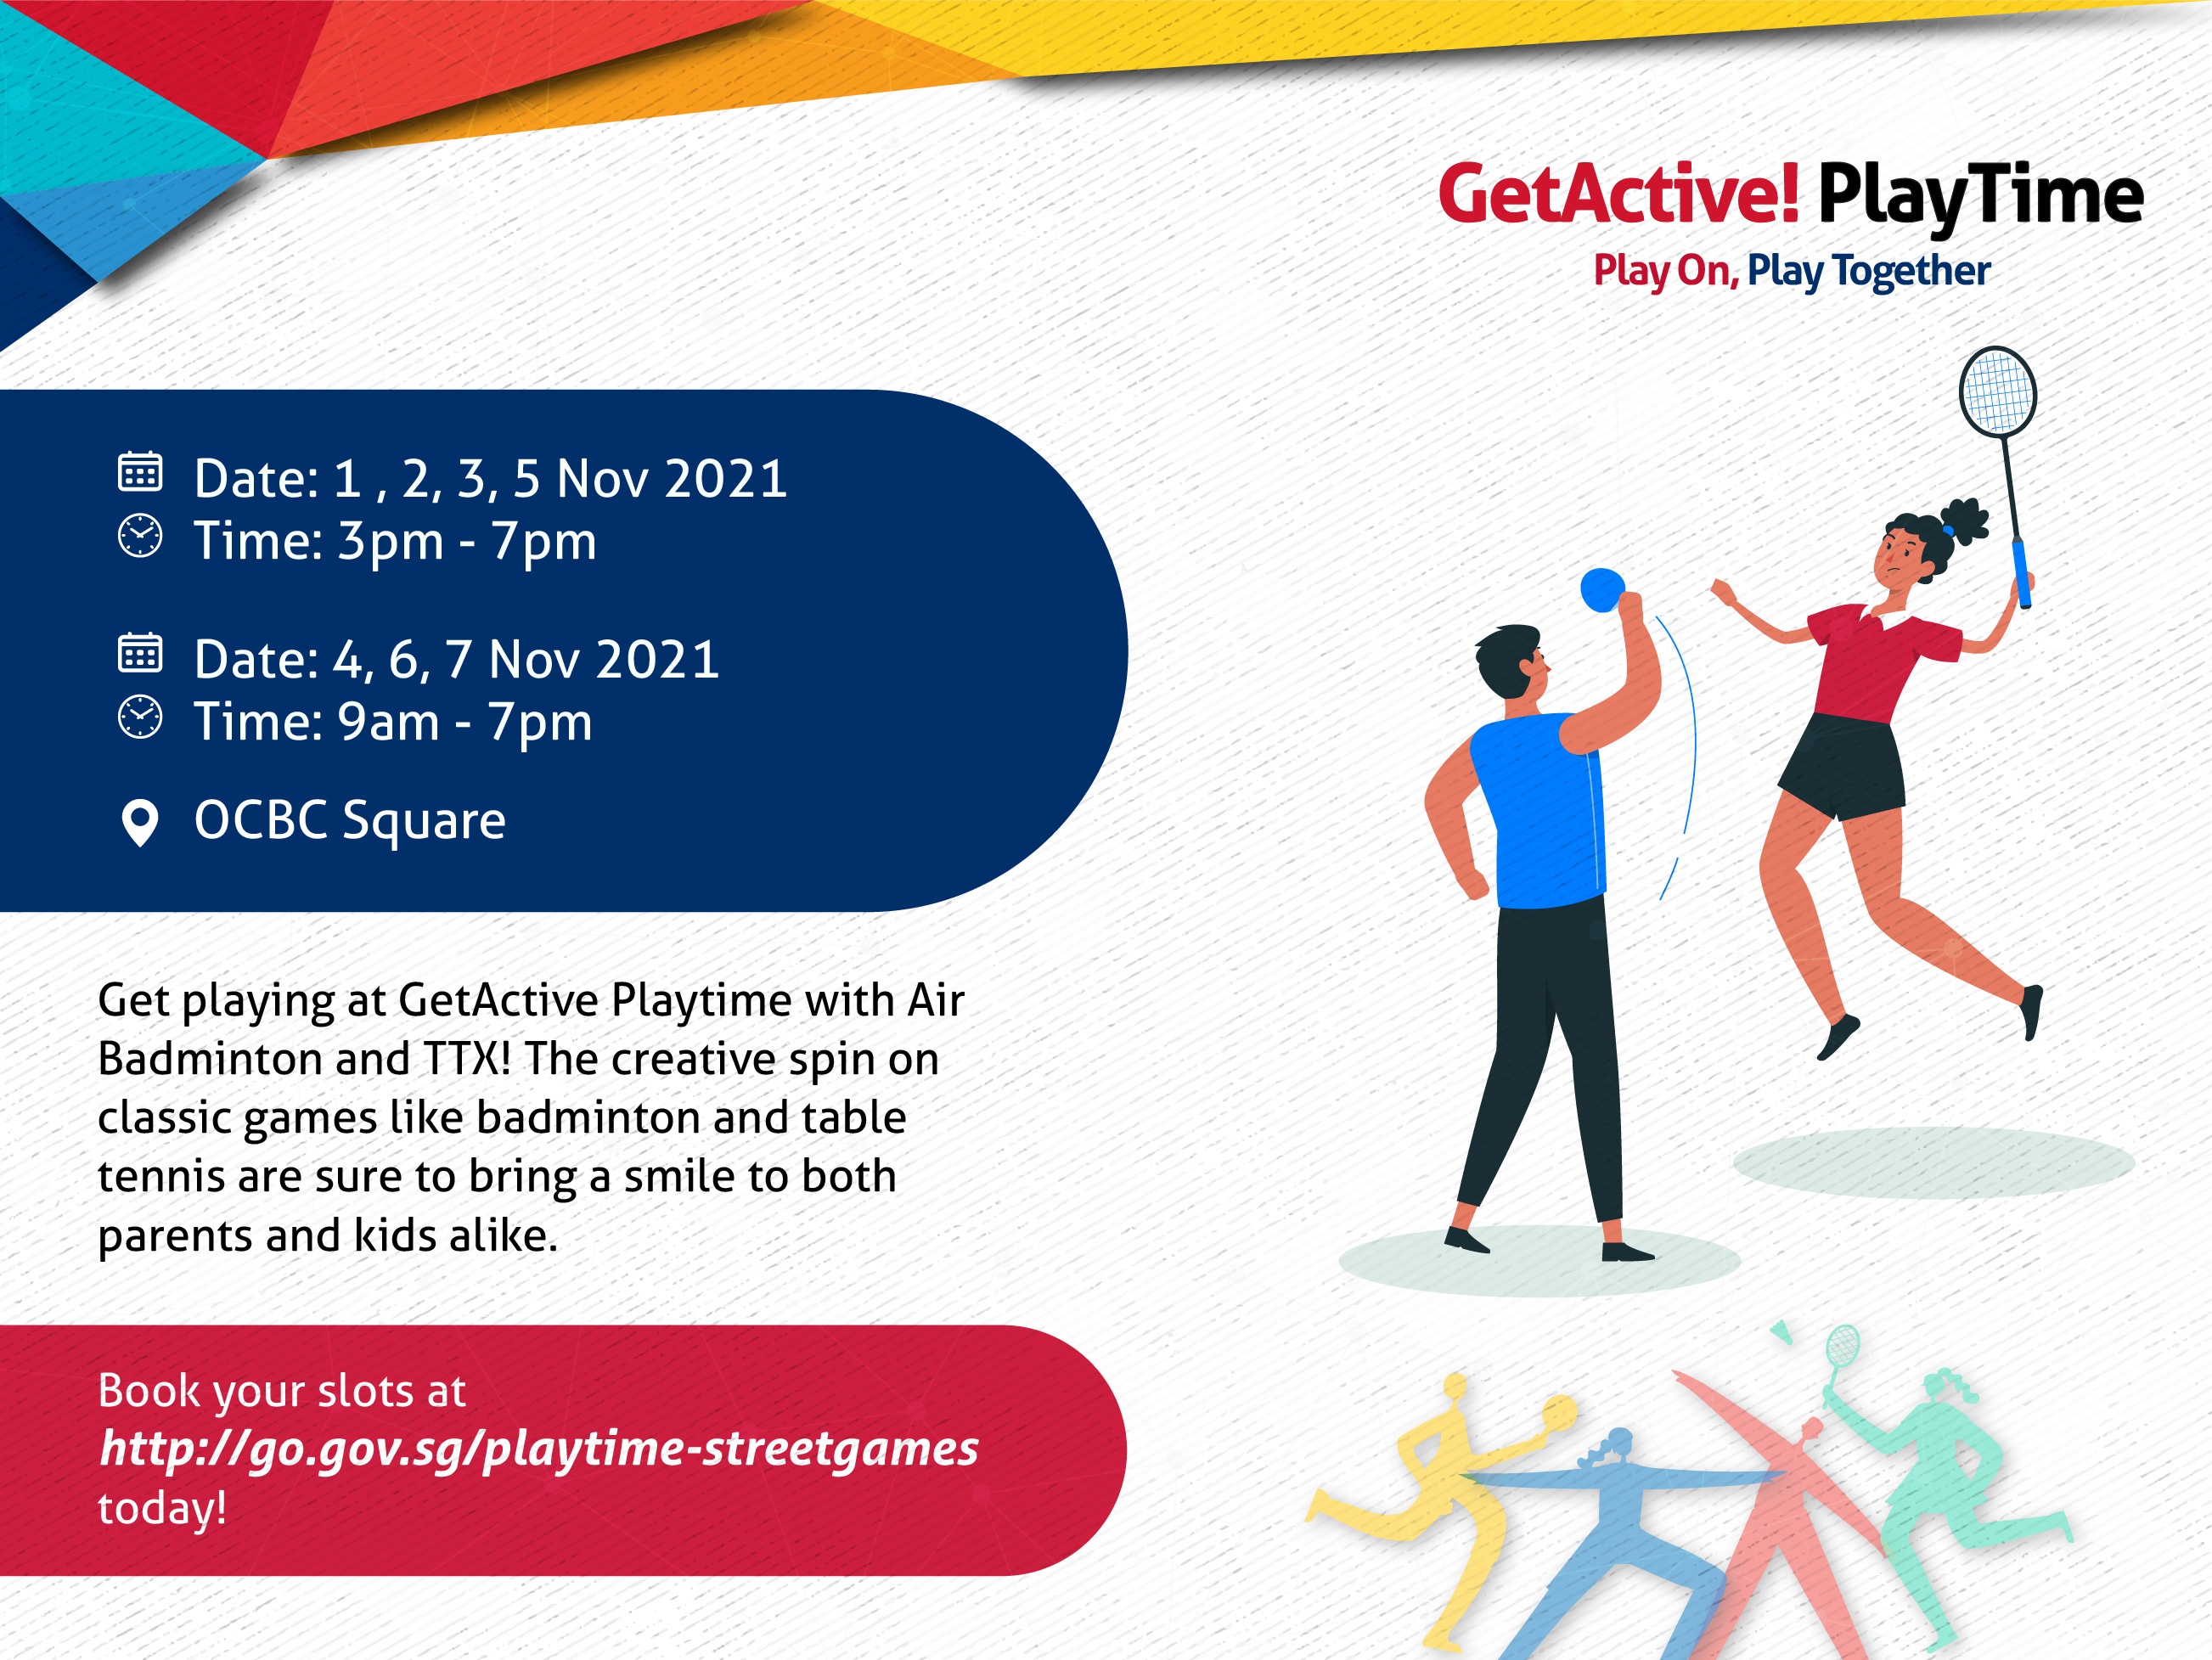 GetActive! Playtime: Are you (Street) Game enough?